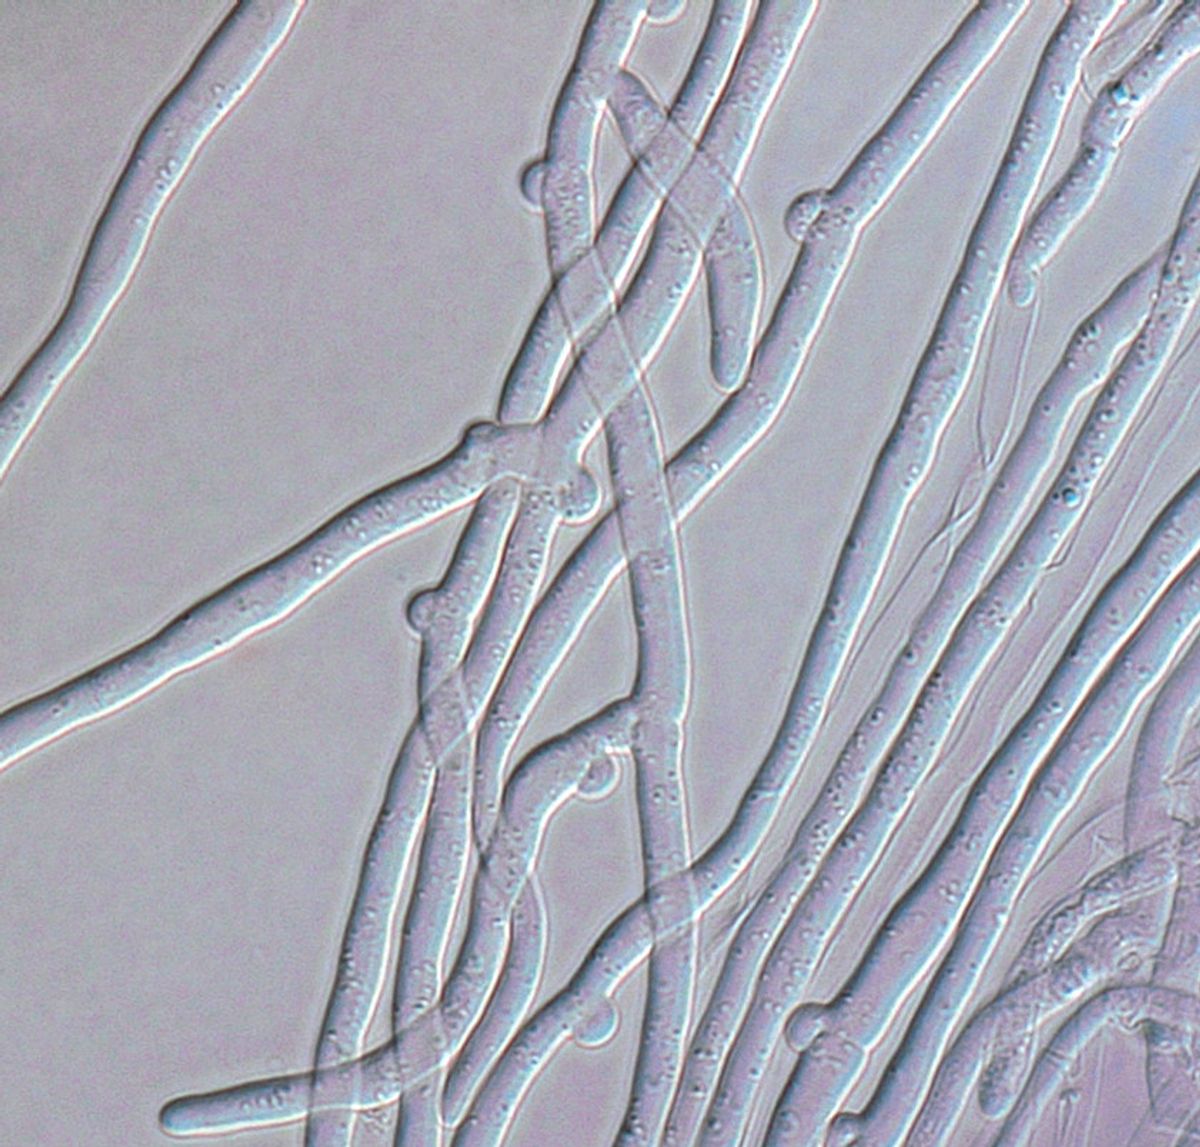 microscopic image of joined hyphae